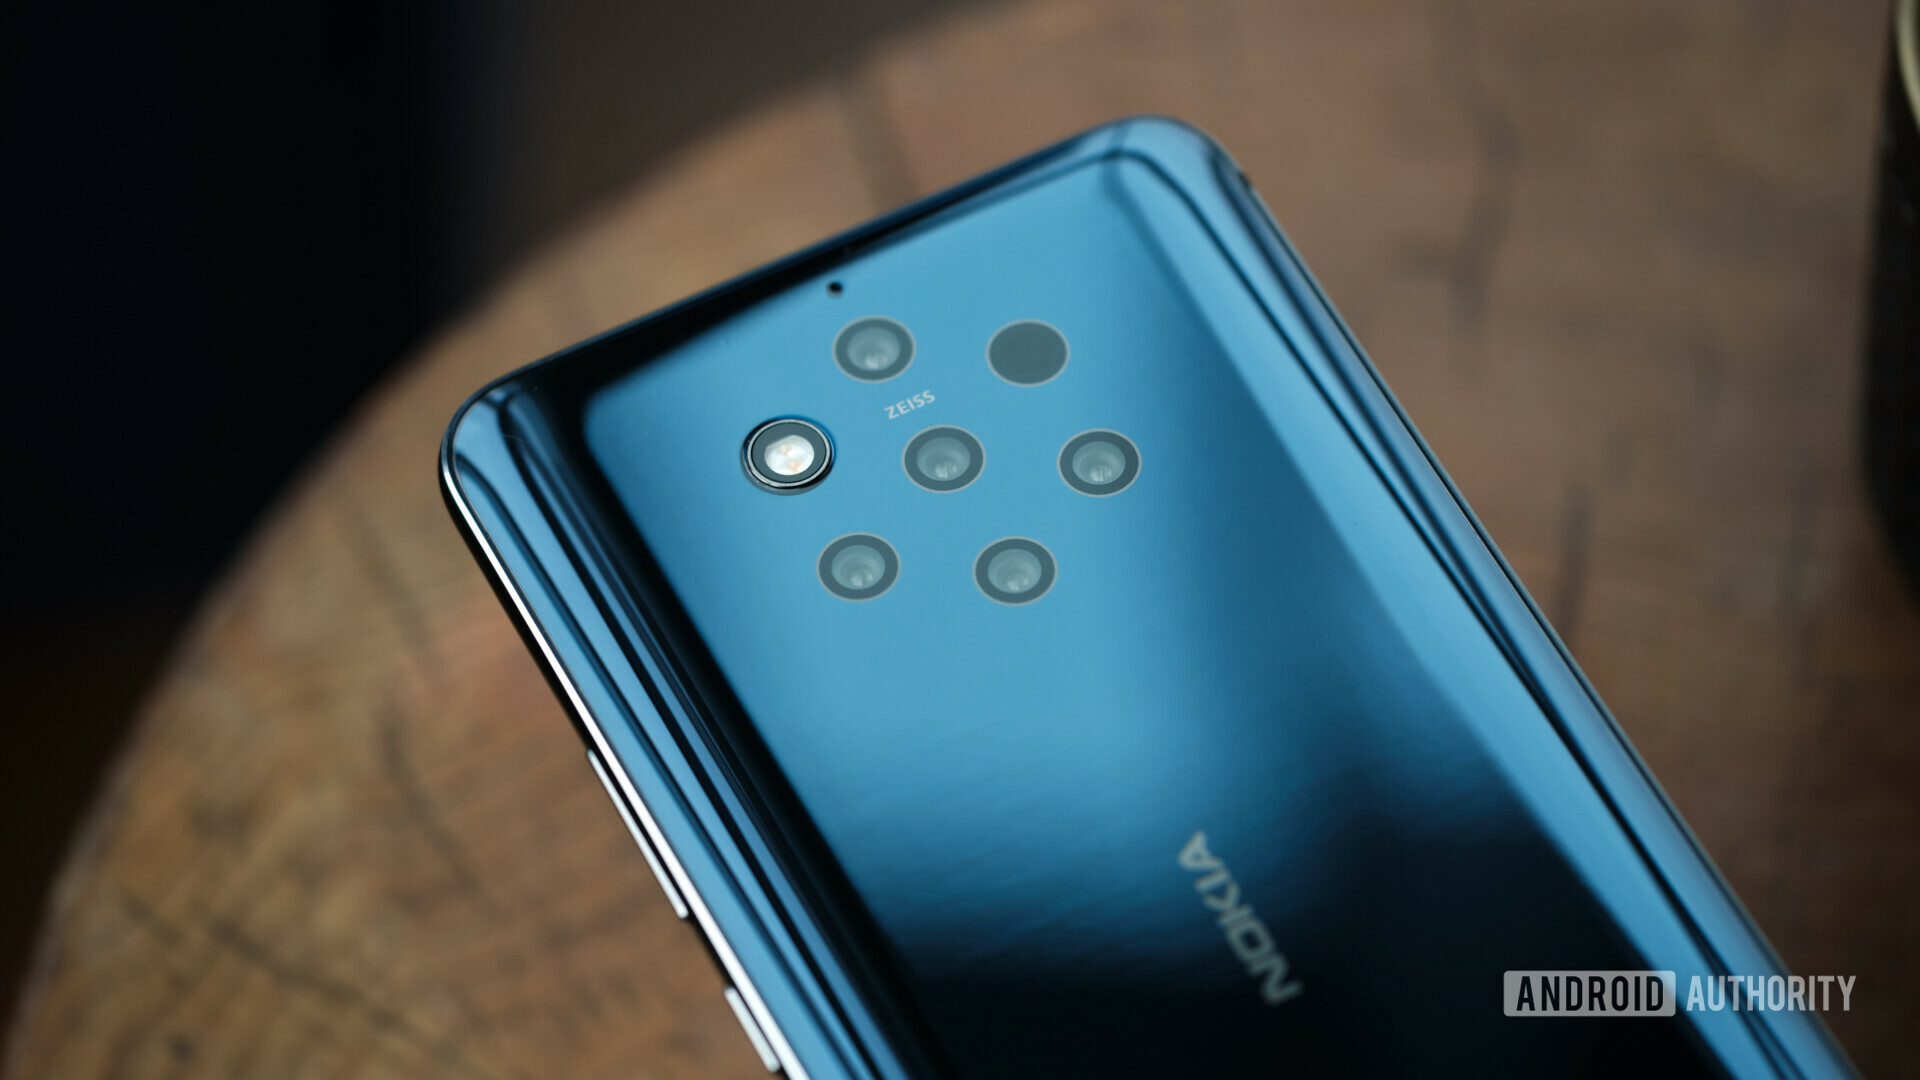 Backside of the Nokia 9 PureView showing the five cameras